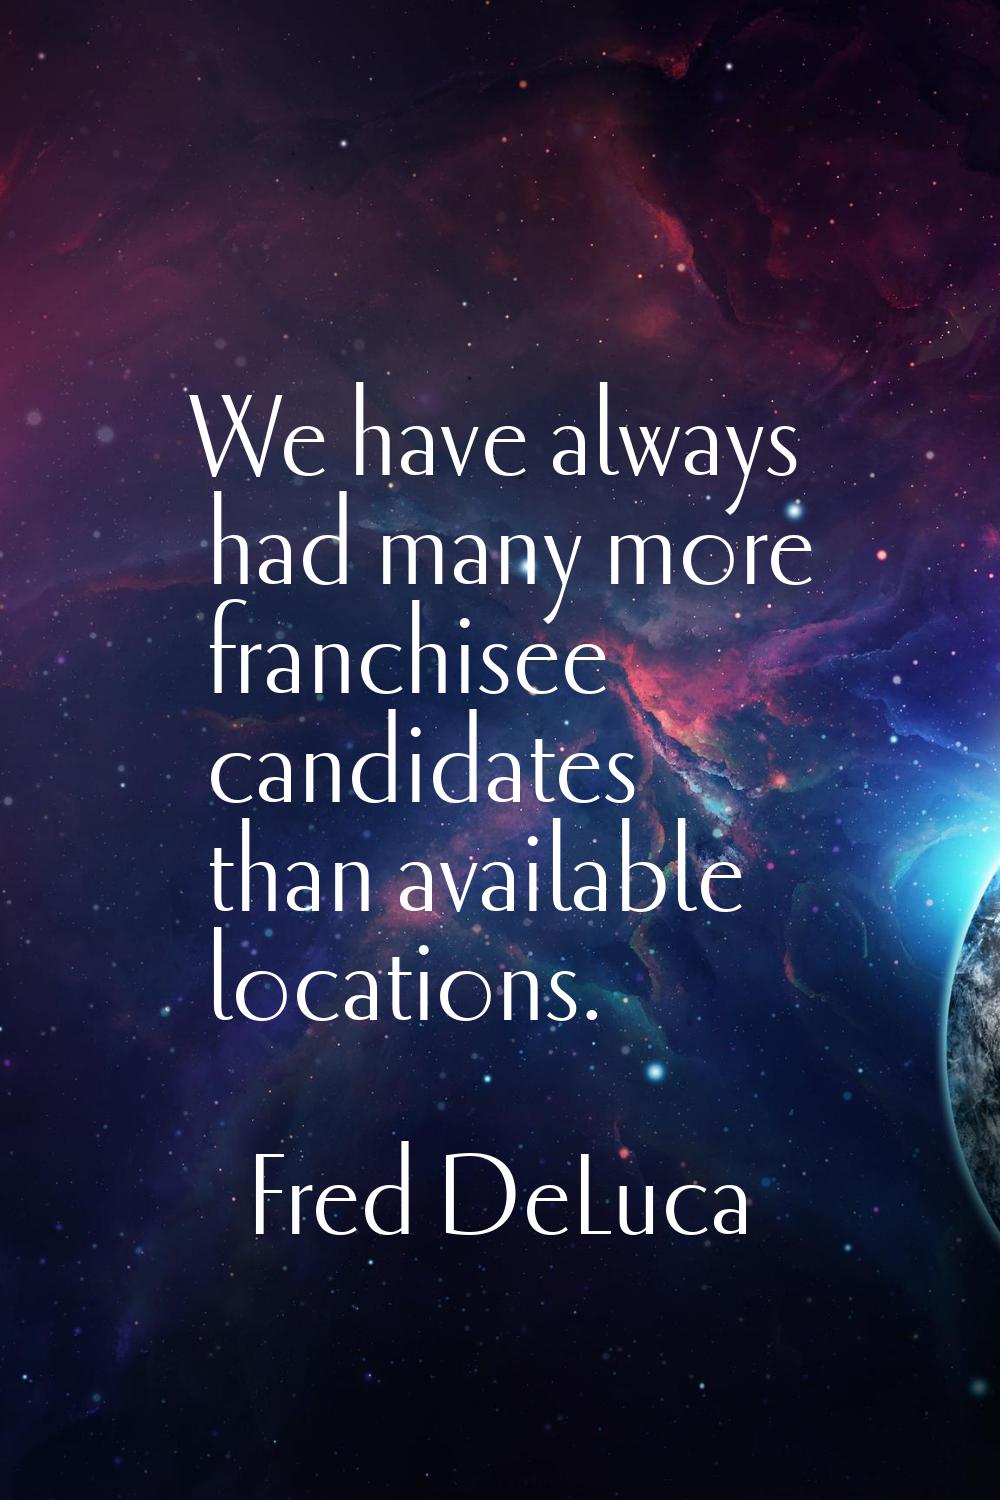 We have always had many more franchisee candidates than available locations.